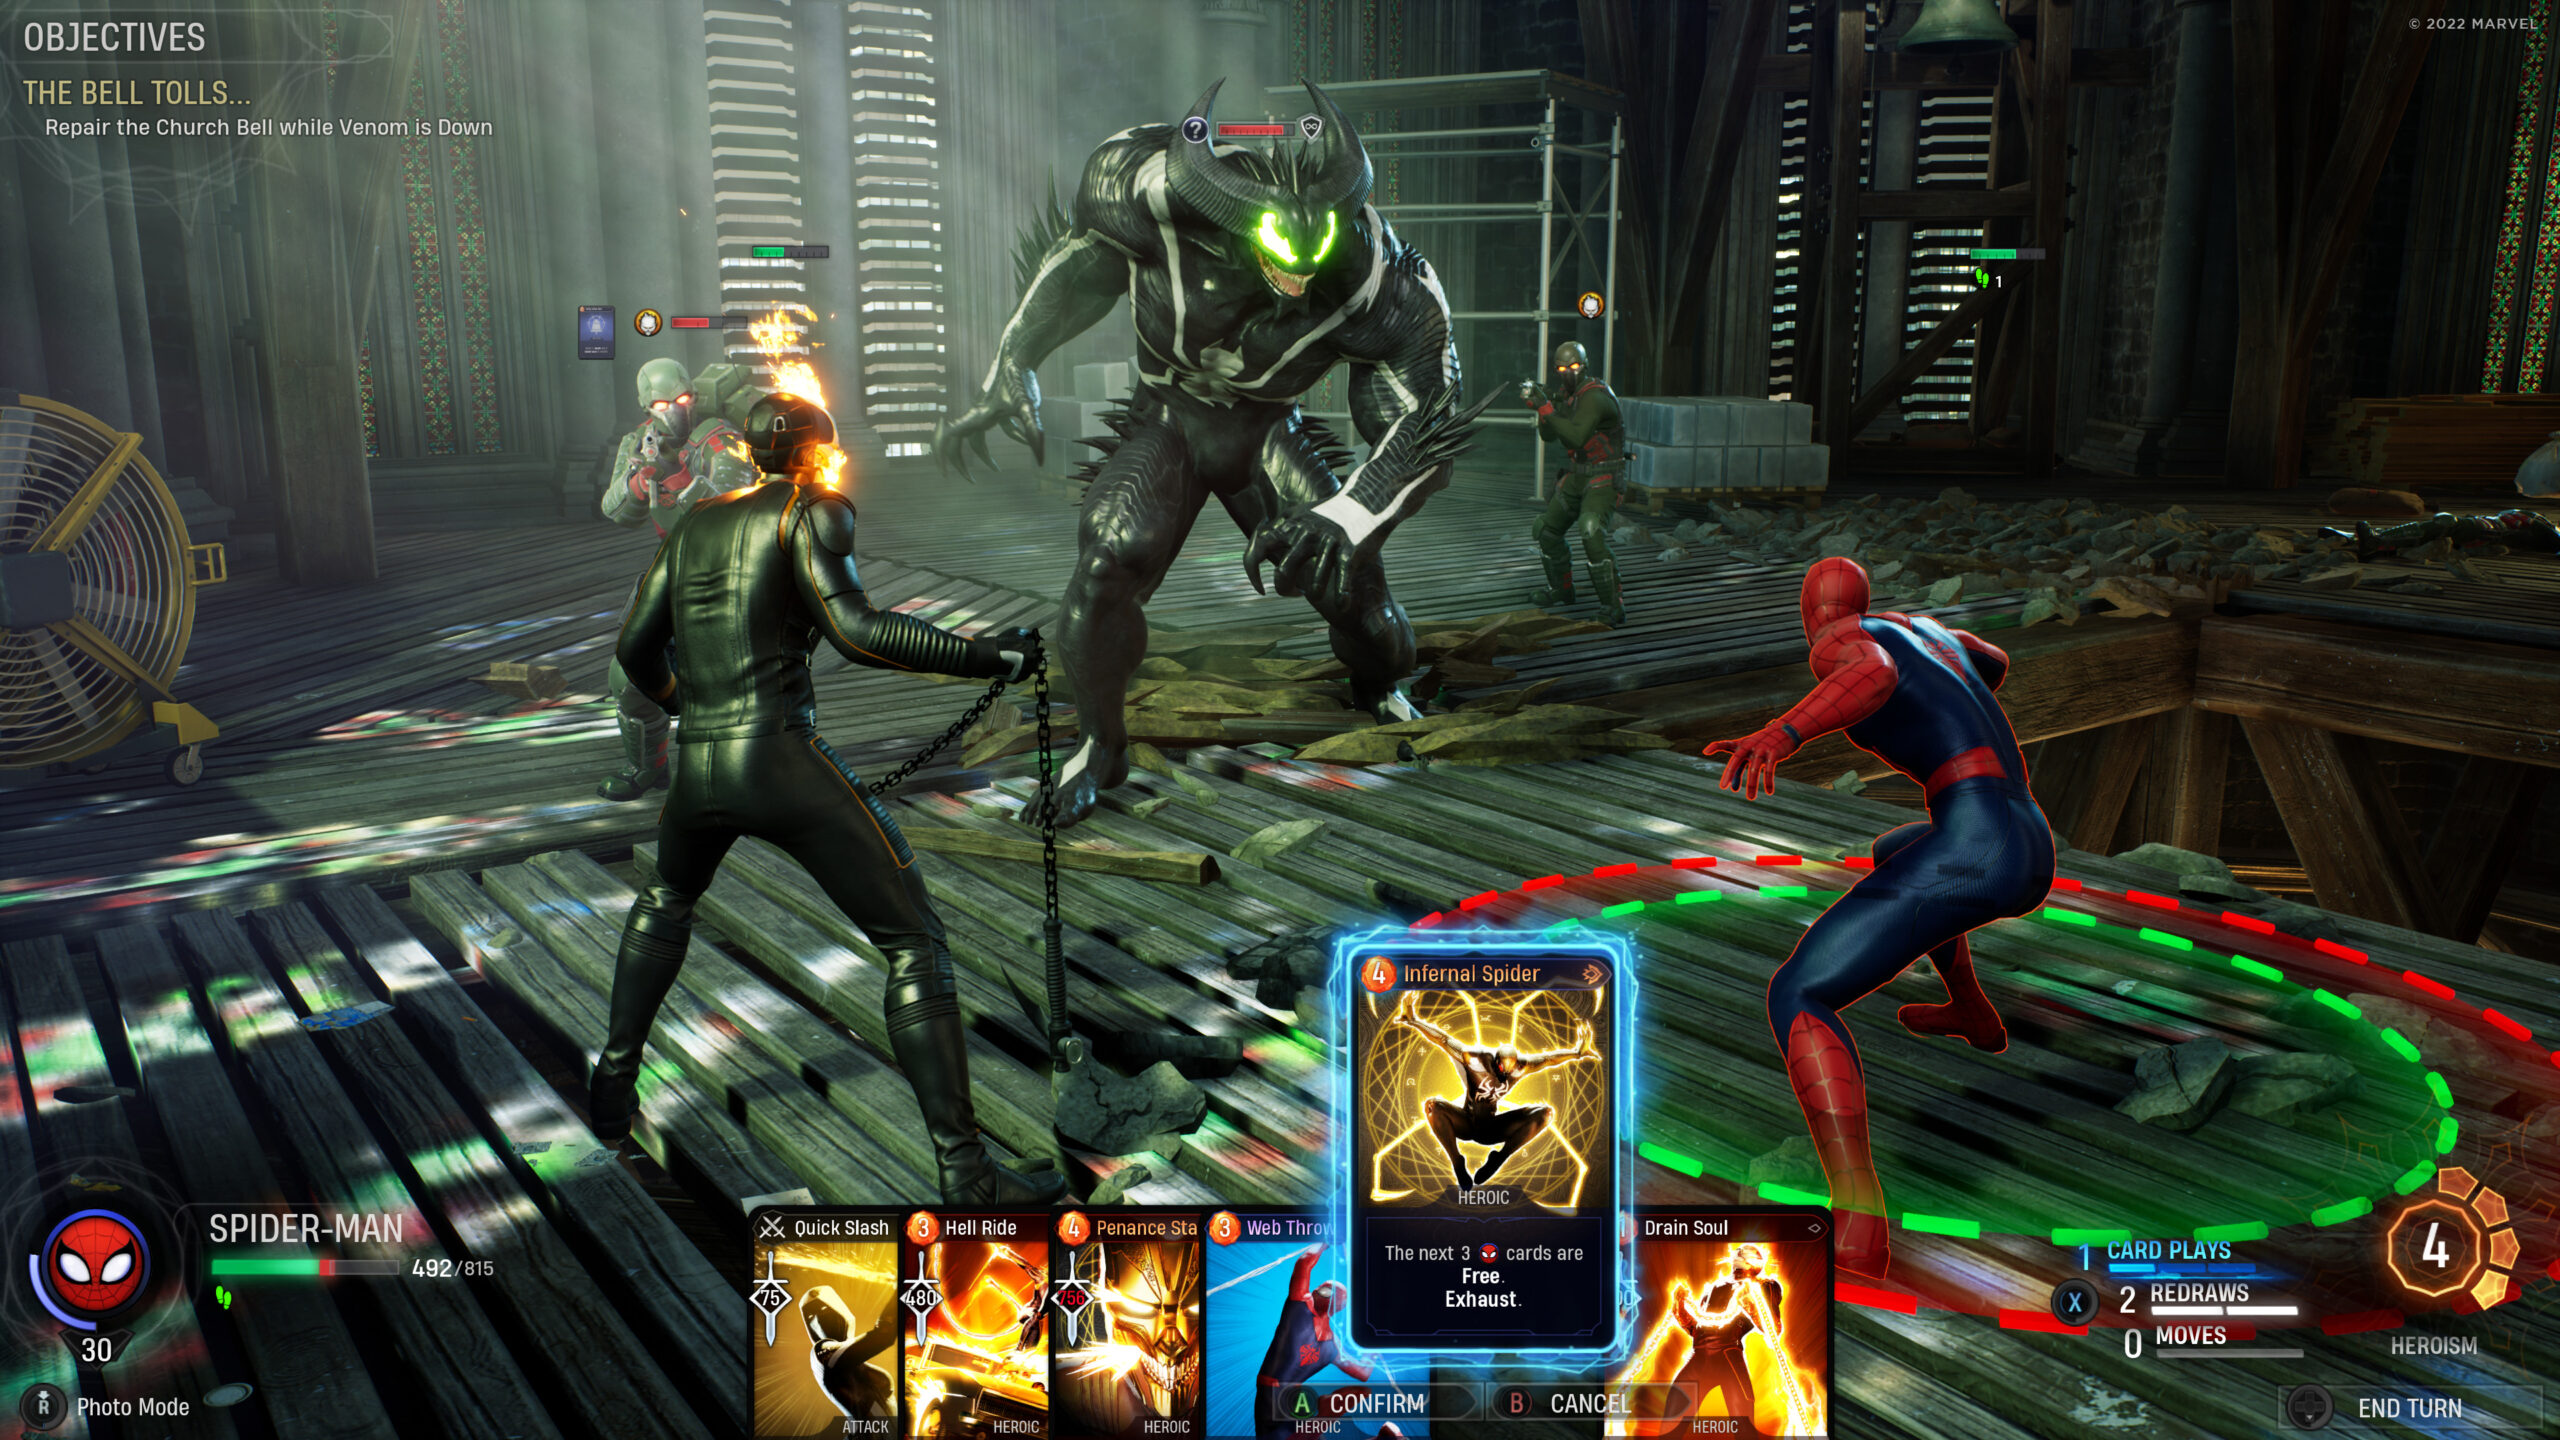 Marvel's Midnight Suns' is a card-based tactical RPG